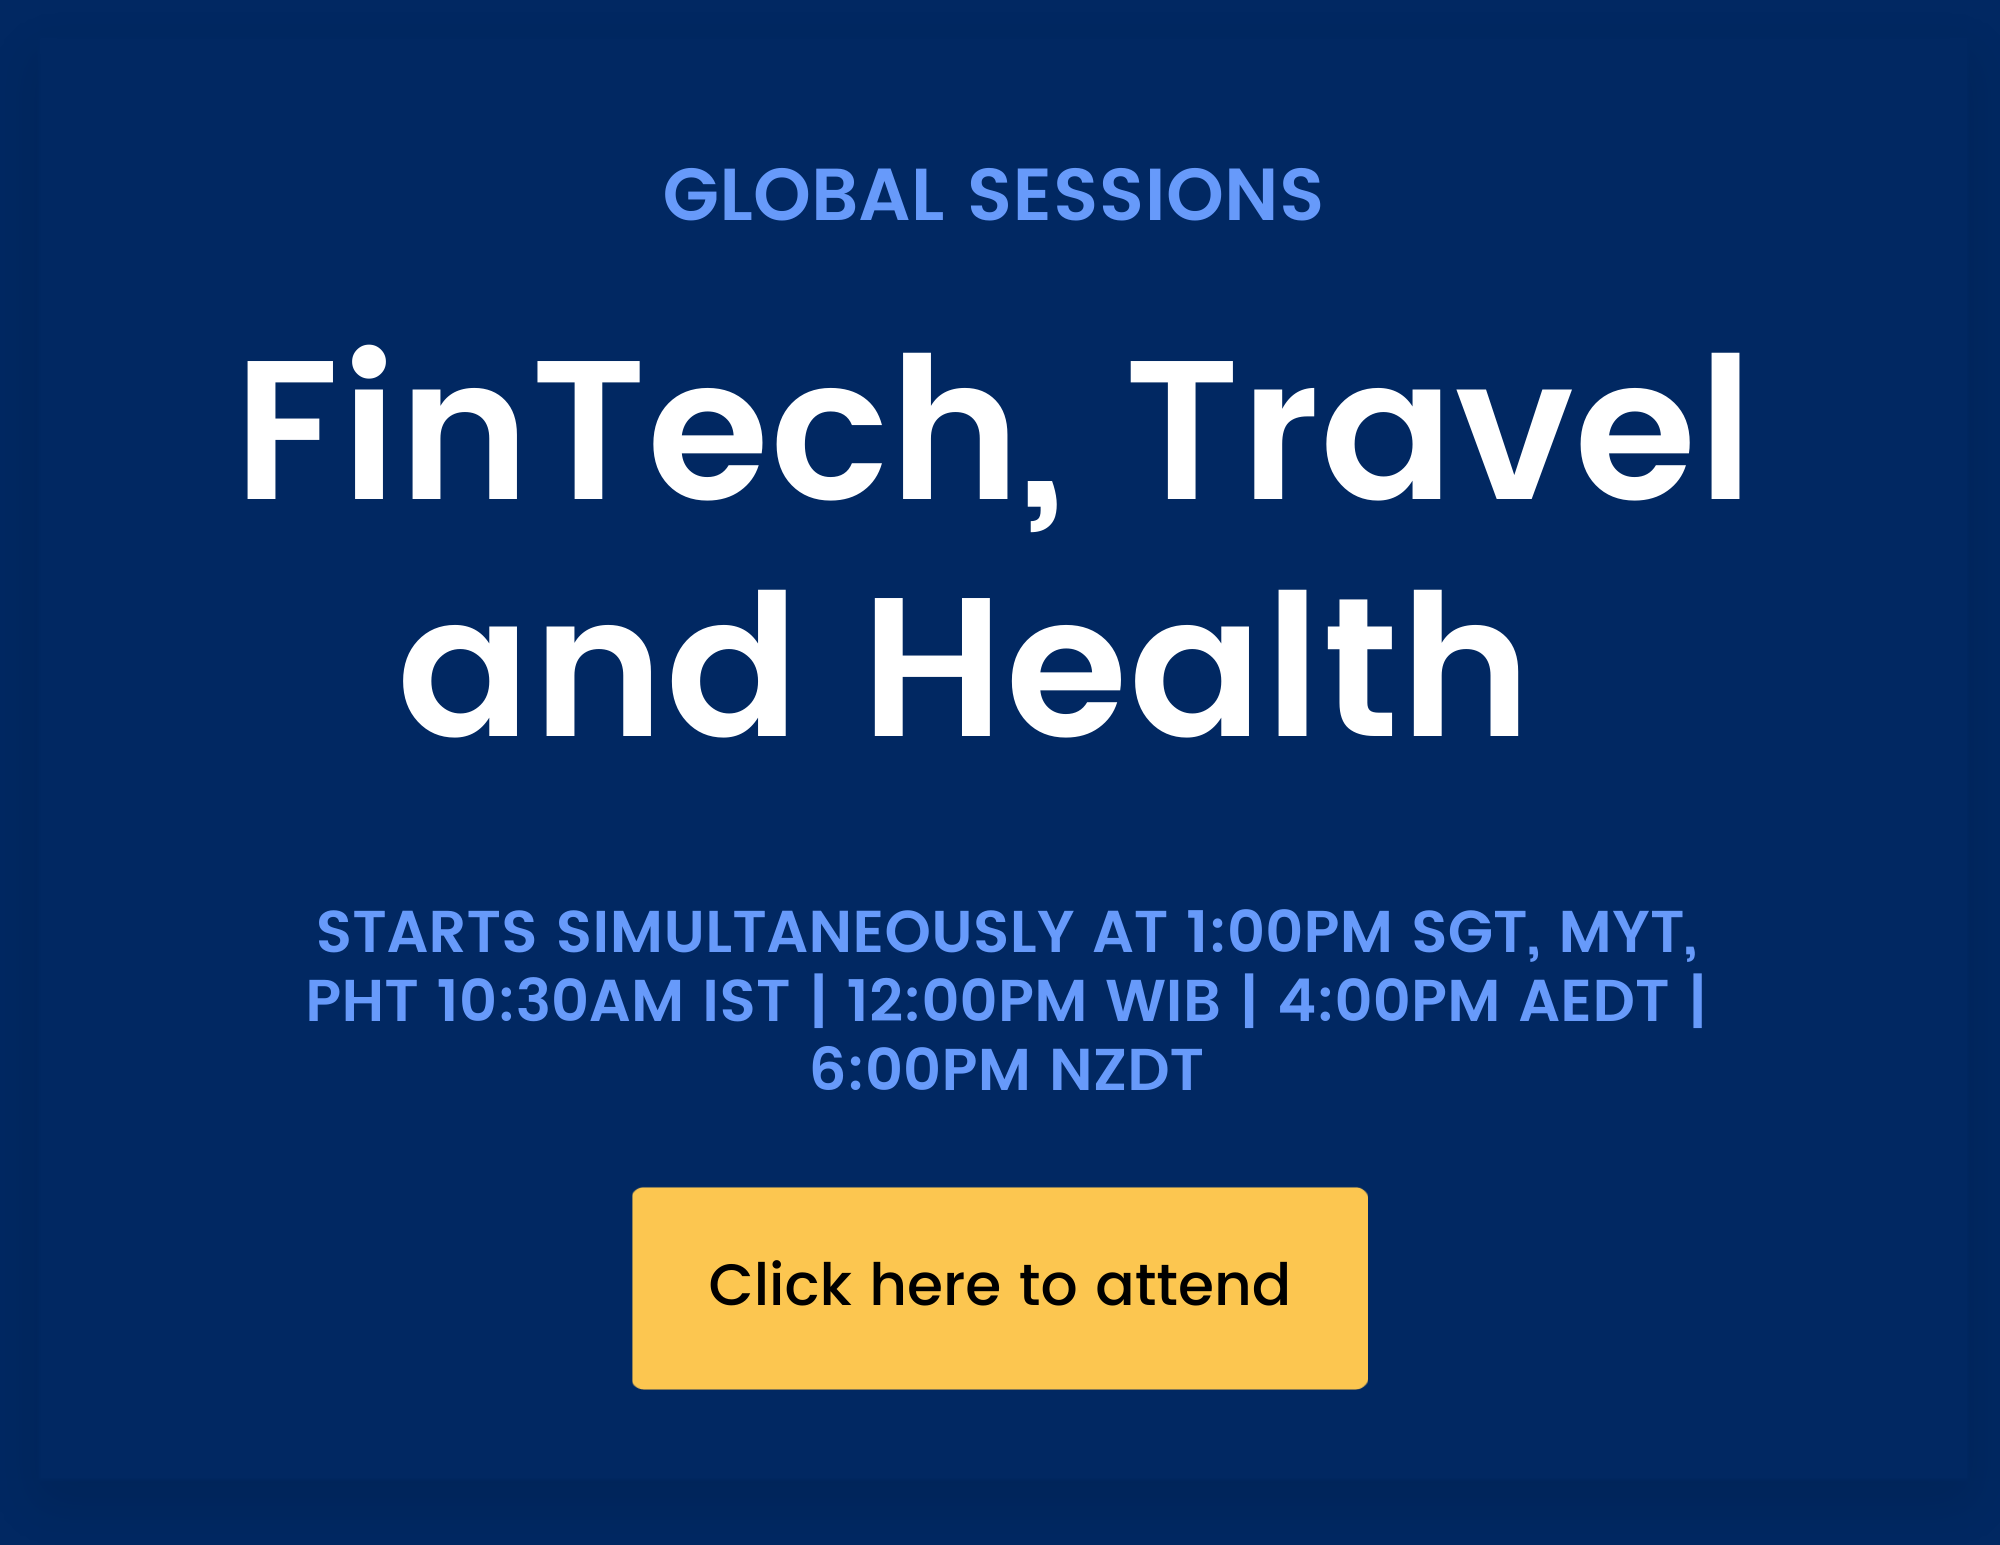 FinTech, Travel and Health Session